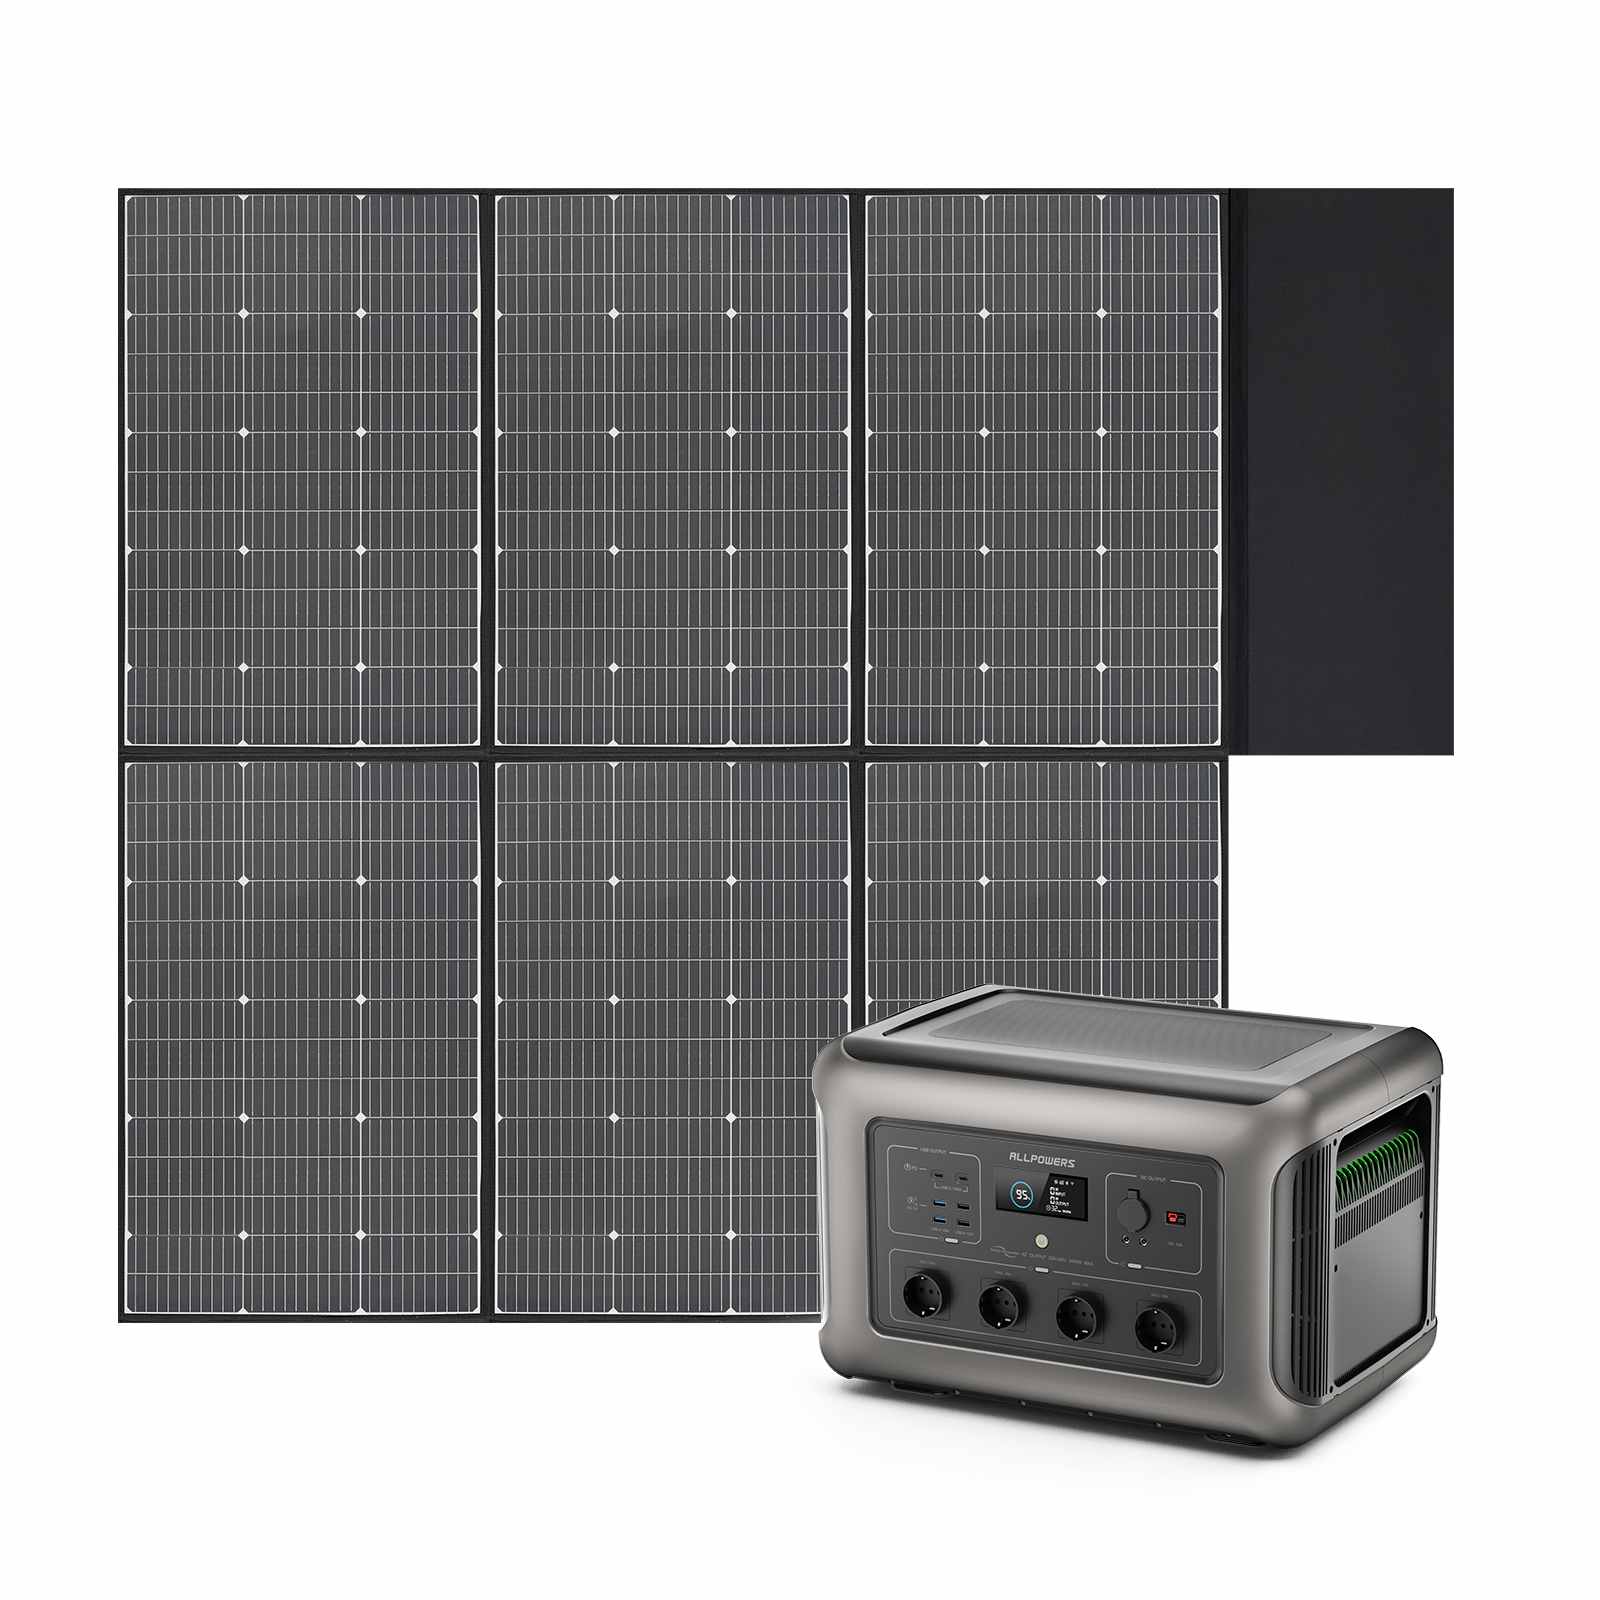 ALLPOWERS R3500 Solar Generator Home Backup Power Station 3500W 3168Wh with SP039 600W Solar Panel